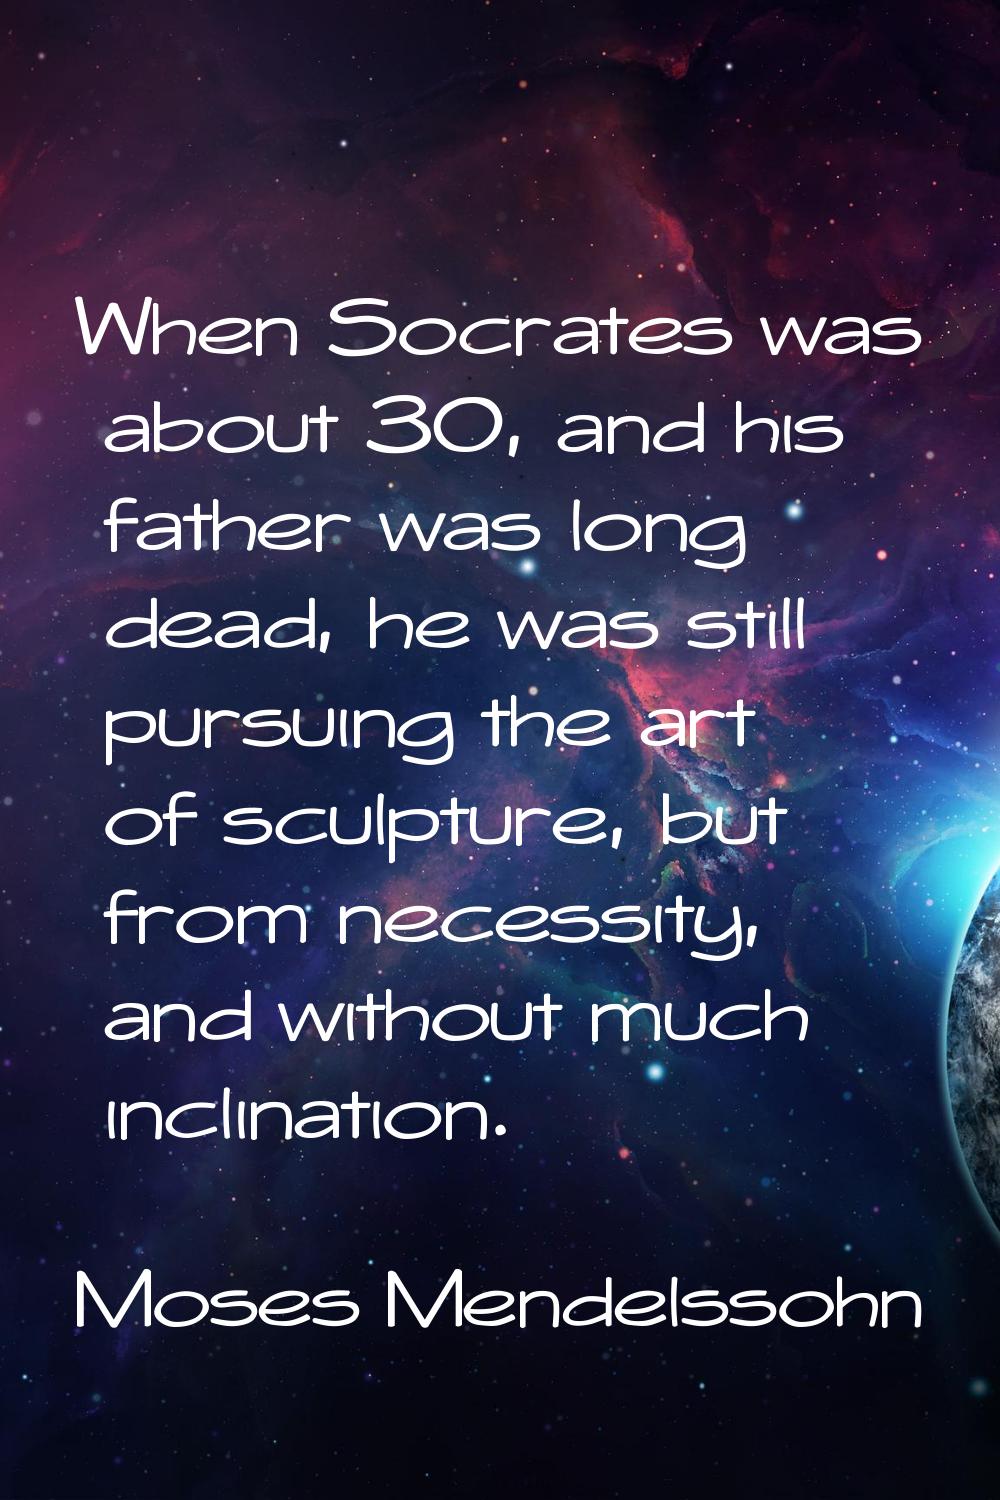 When Socrates was about 30, and his father was long dead, he was still pursuing the art of sculptur